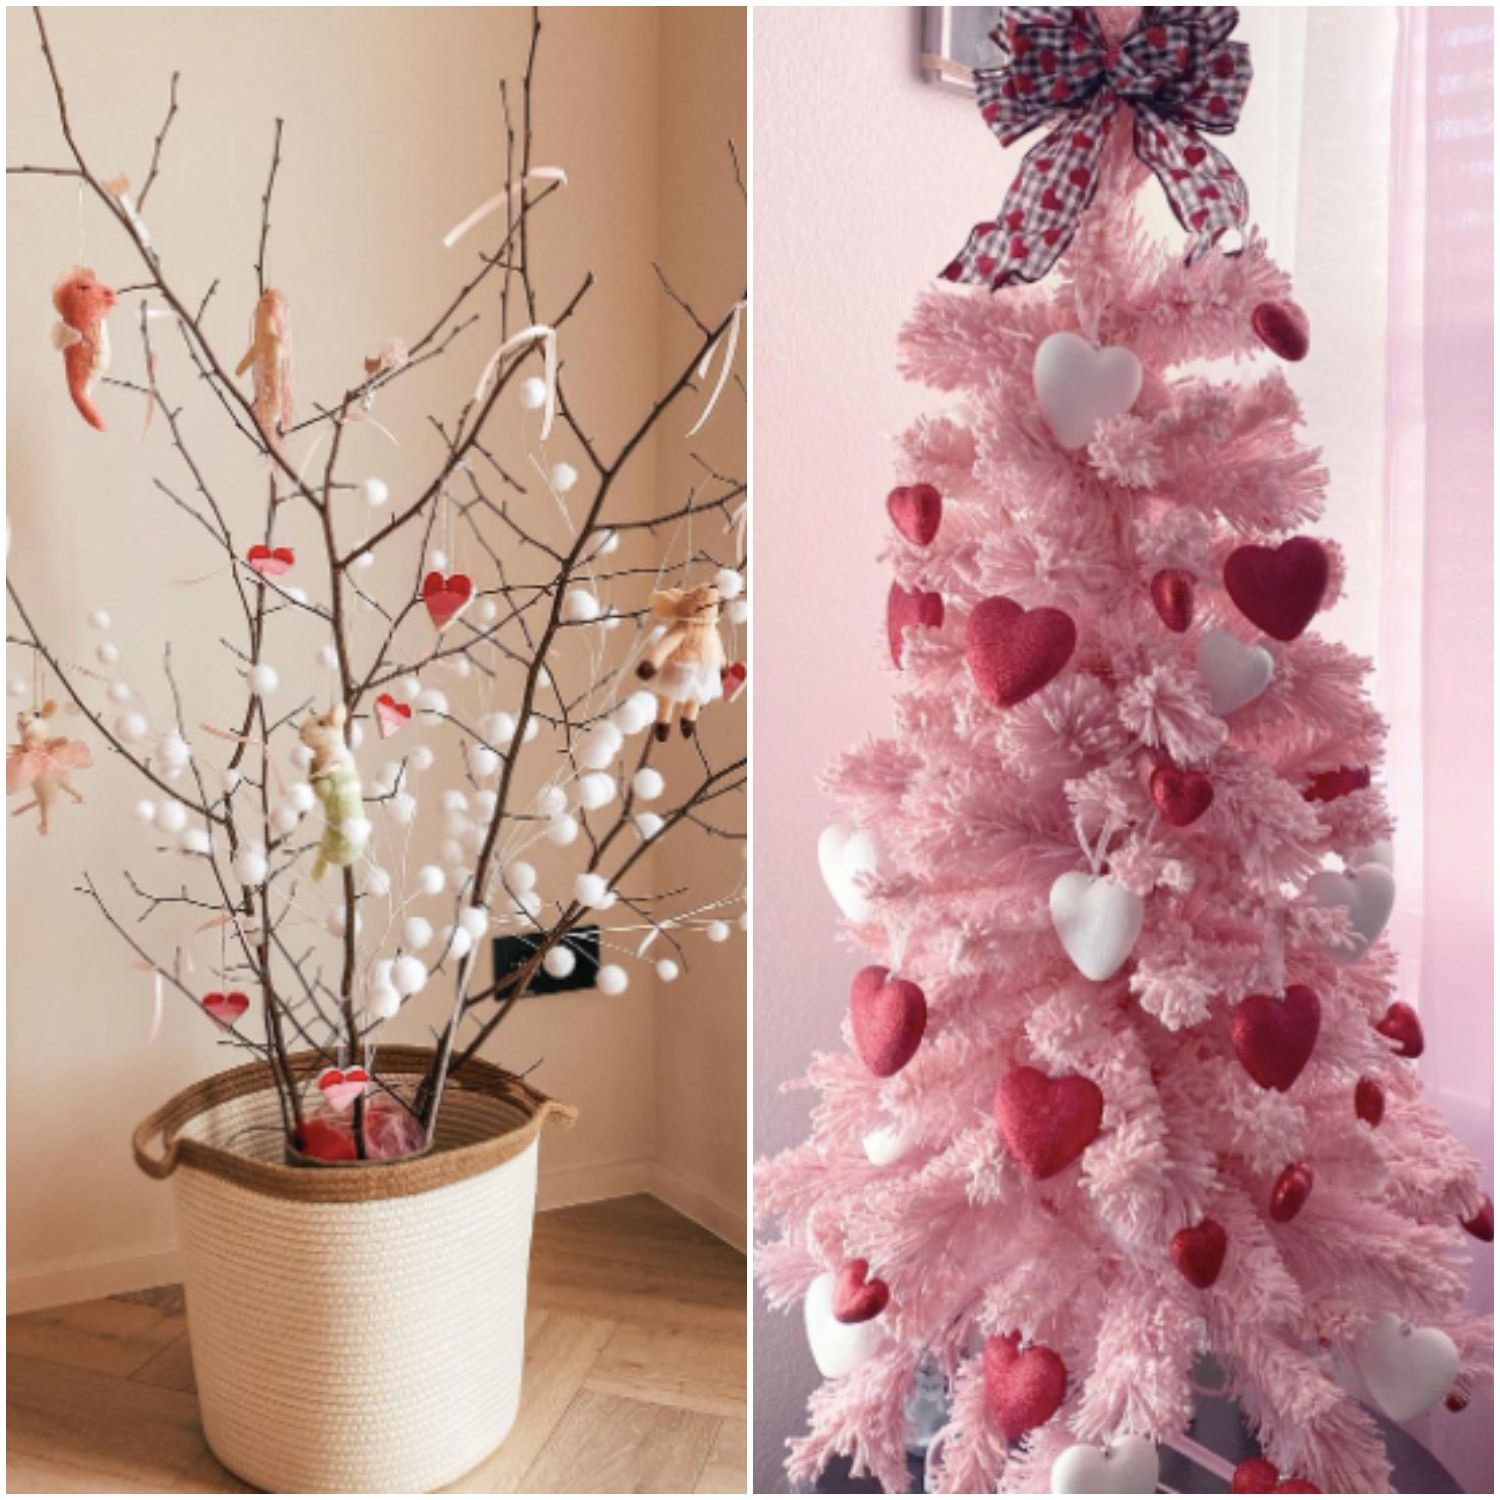 People Are Repurposing Their Christmas Trees for Valentine's Day